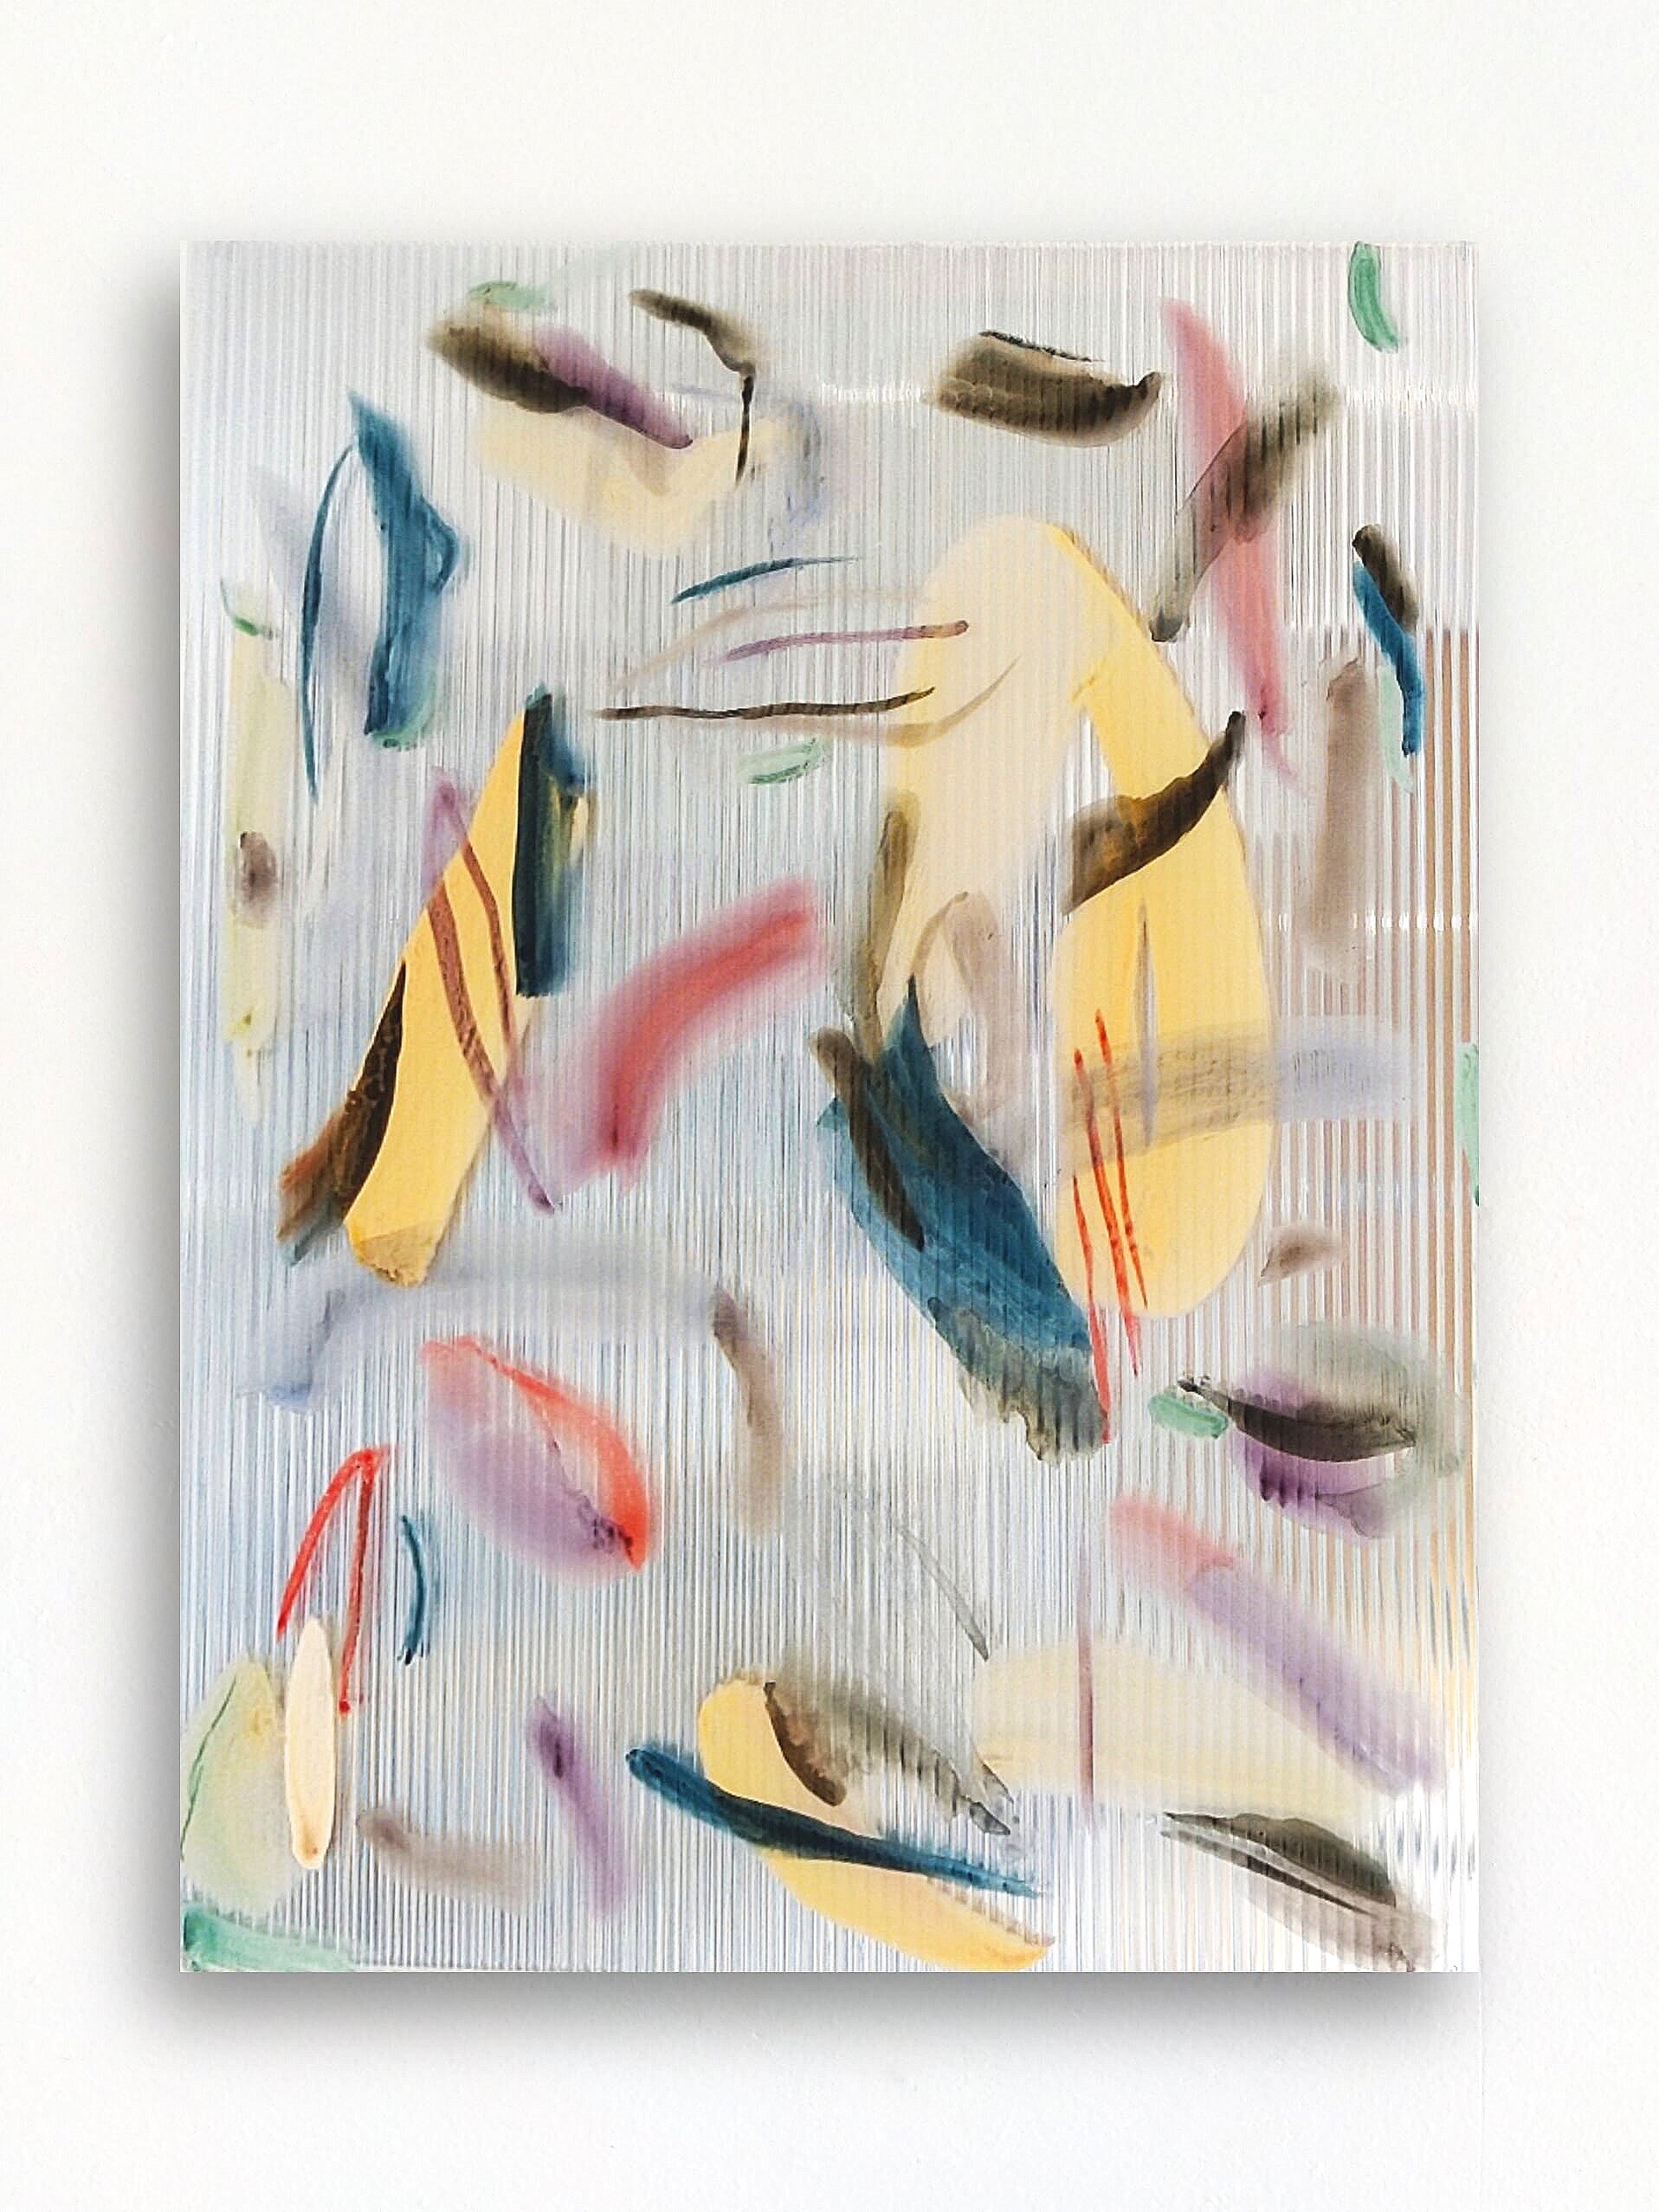   Untitled (Feather) , 2019 Gouache on polycarbonate, two-way mirror 61 x 48 cm  private collection 